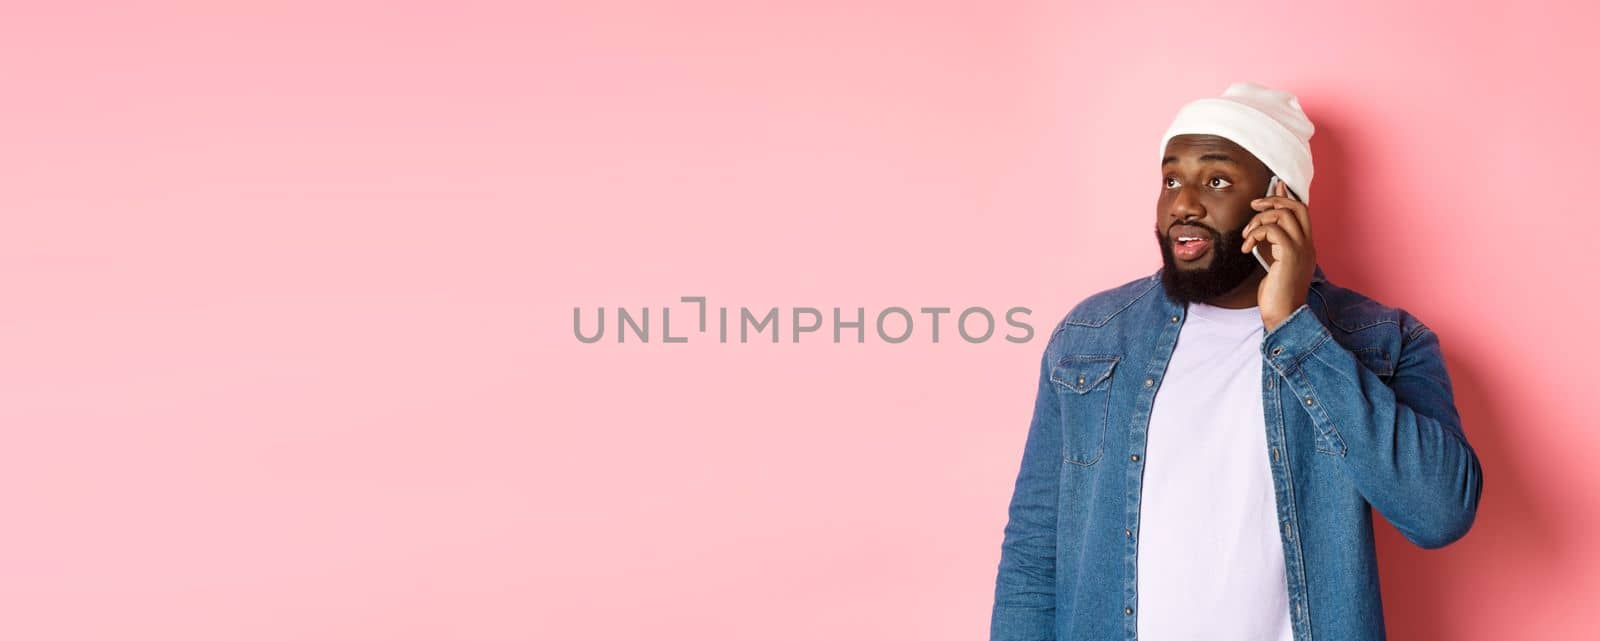 Hipster Black man talking on phone, looking left and having mobile conversation, standing over pink background.